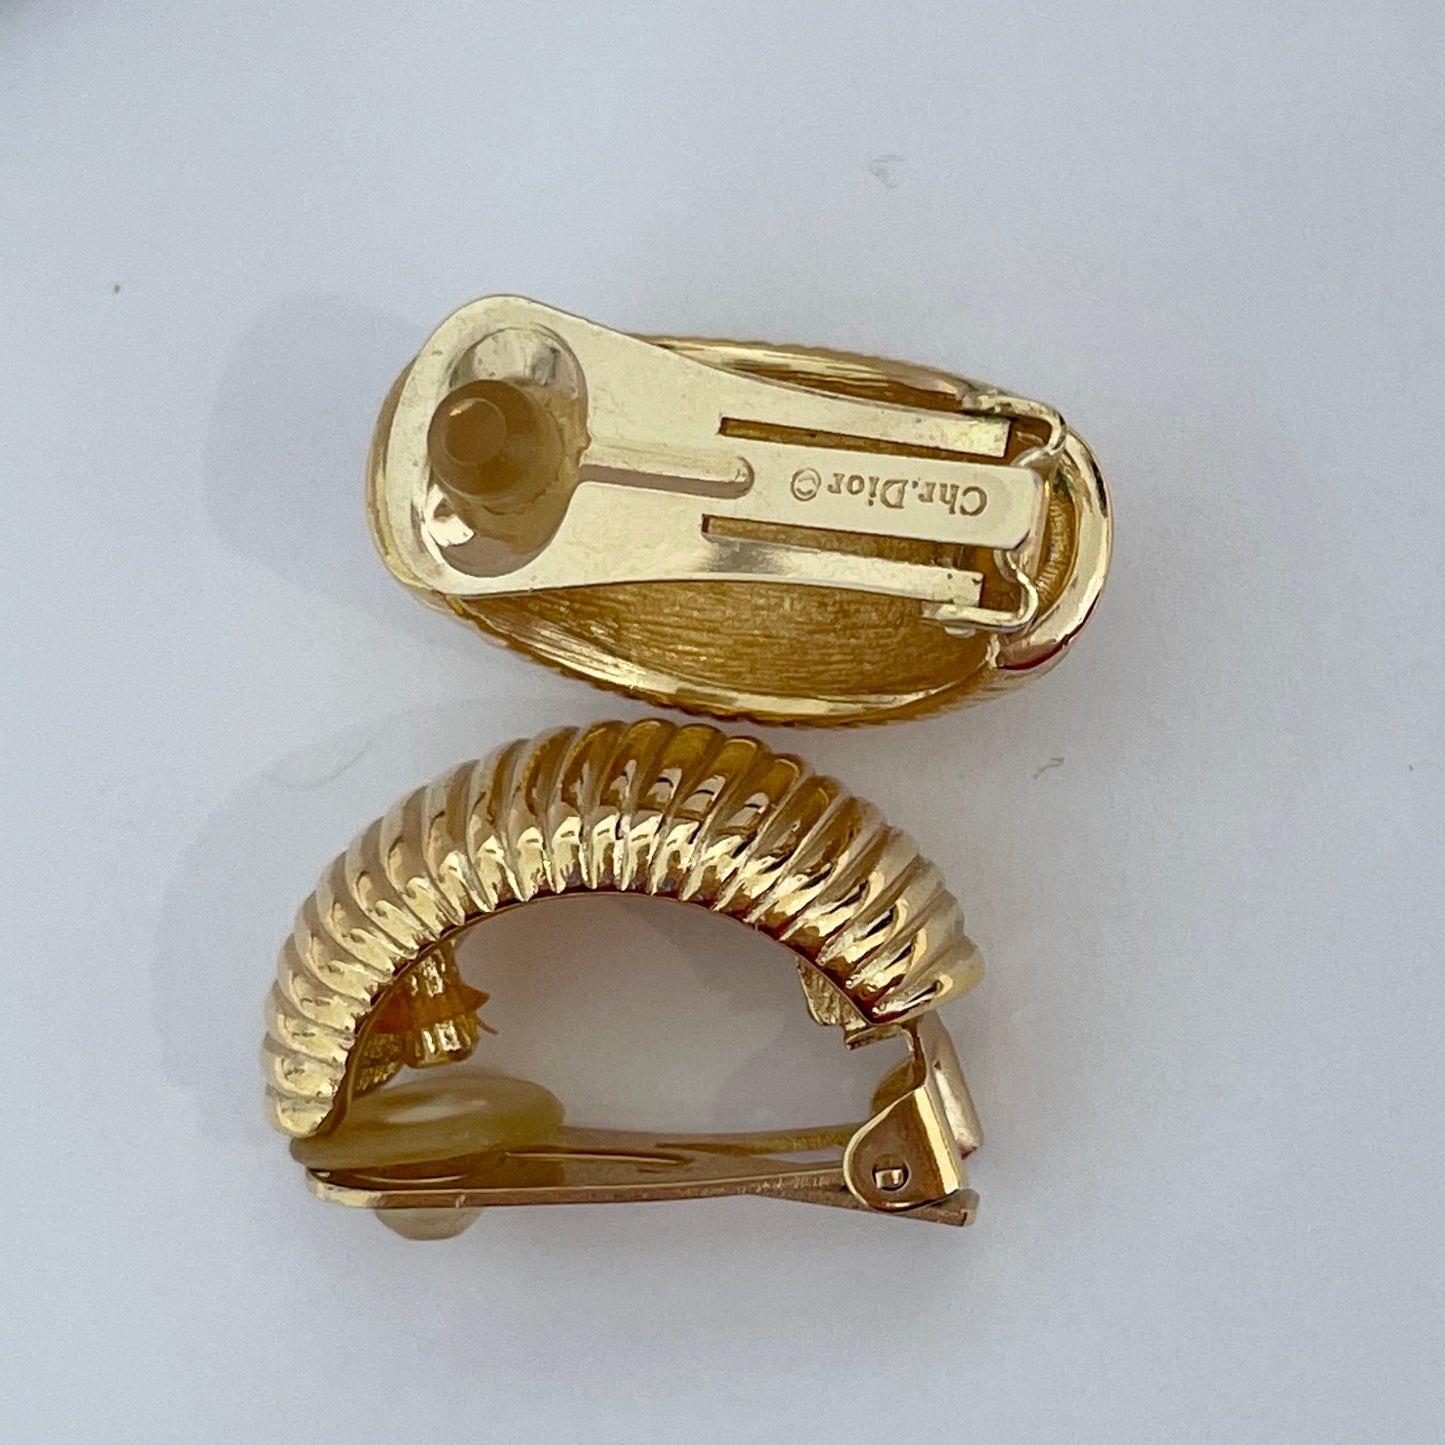 1980s Dior Classic Gold Plated Clip On Earrings